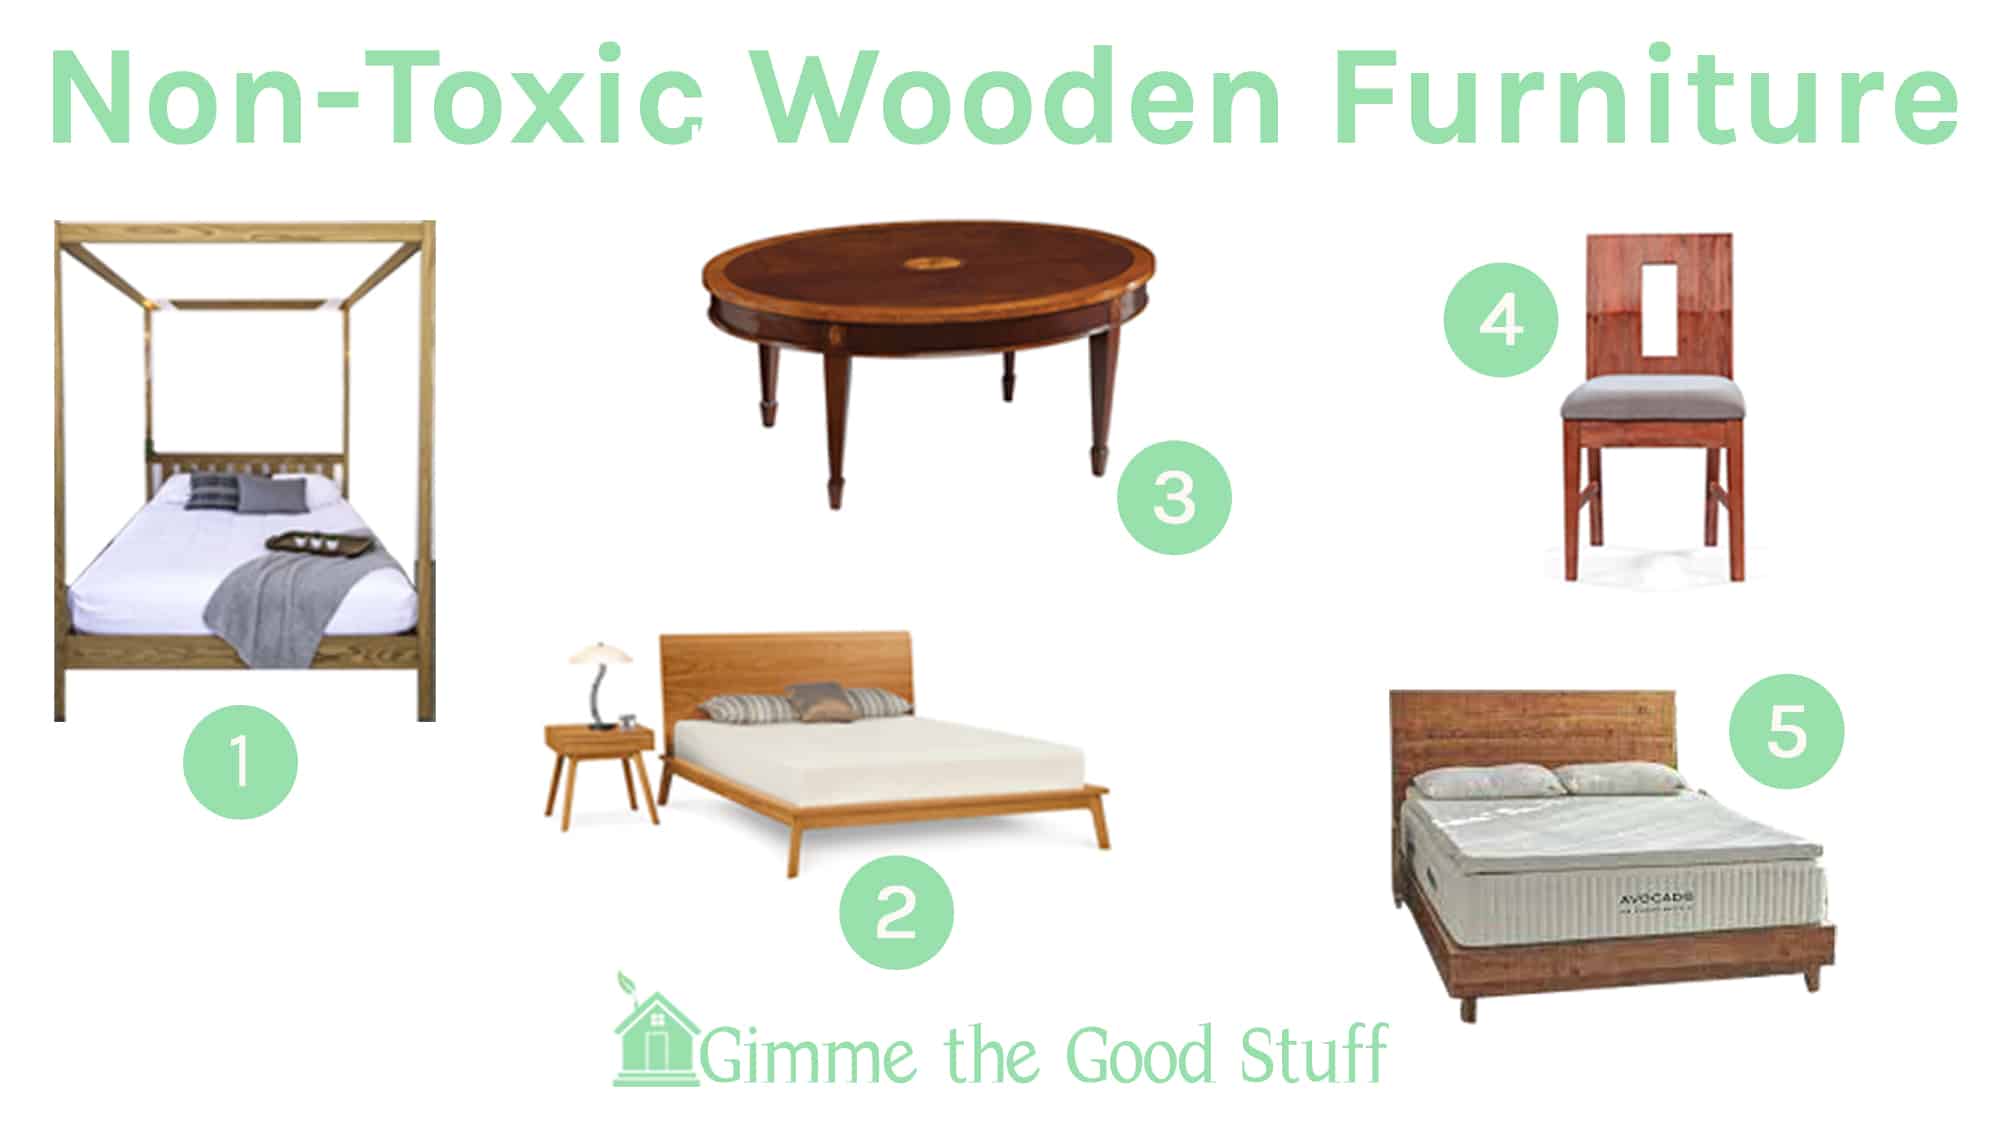 Non-Toxic Wooden Furniture Guide